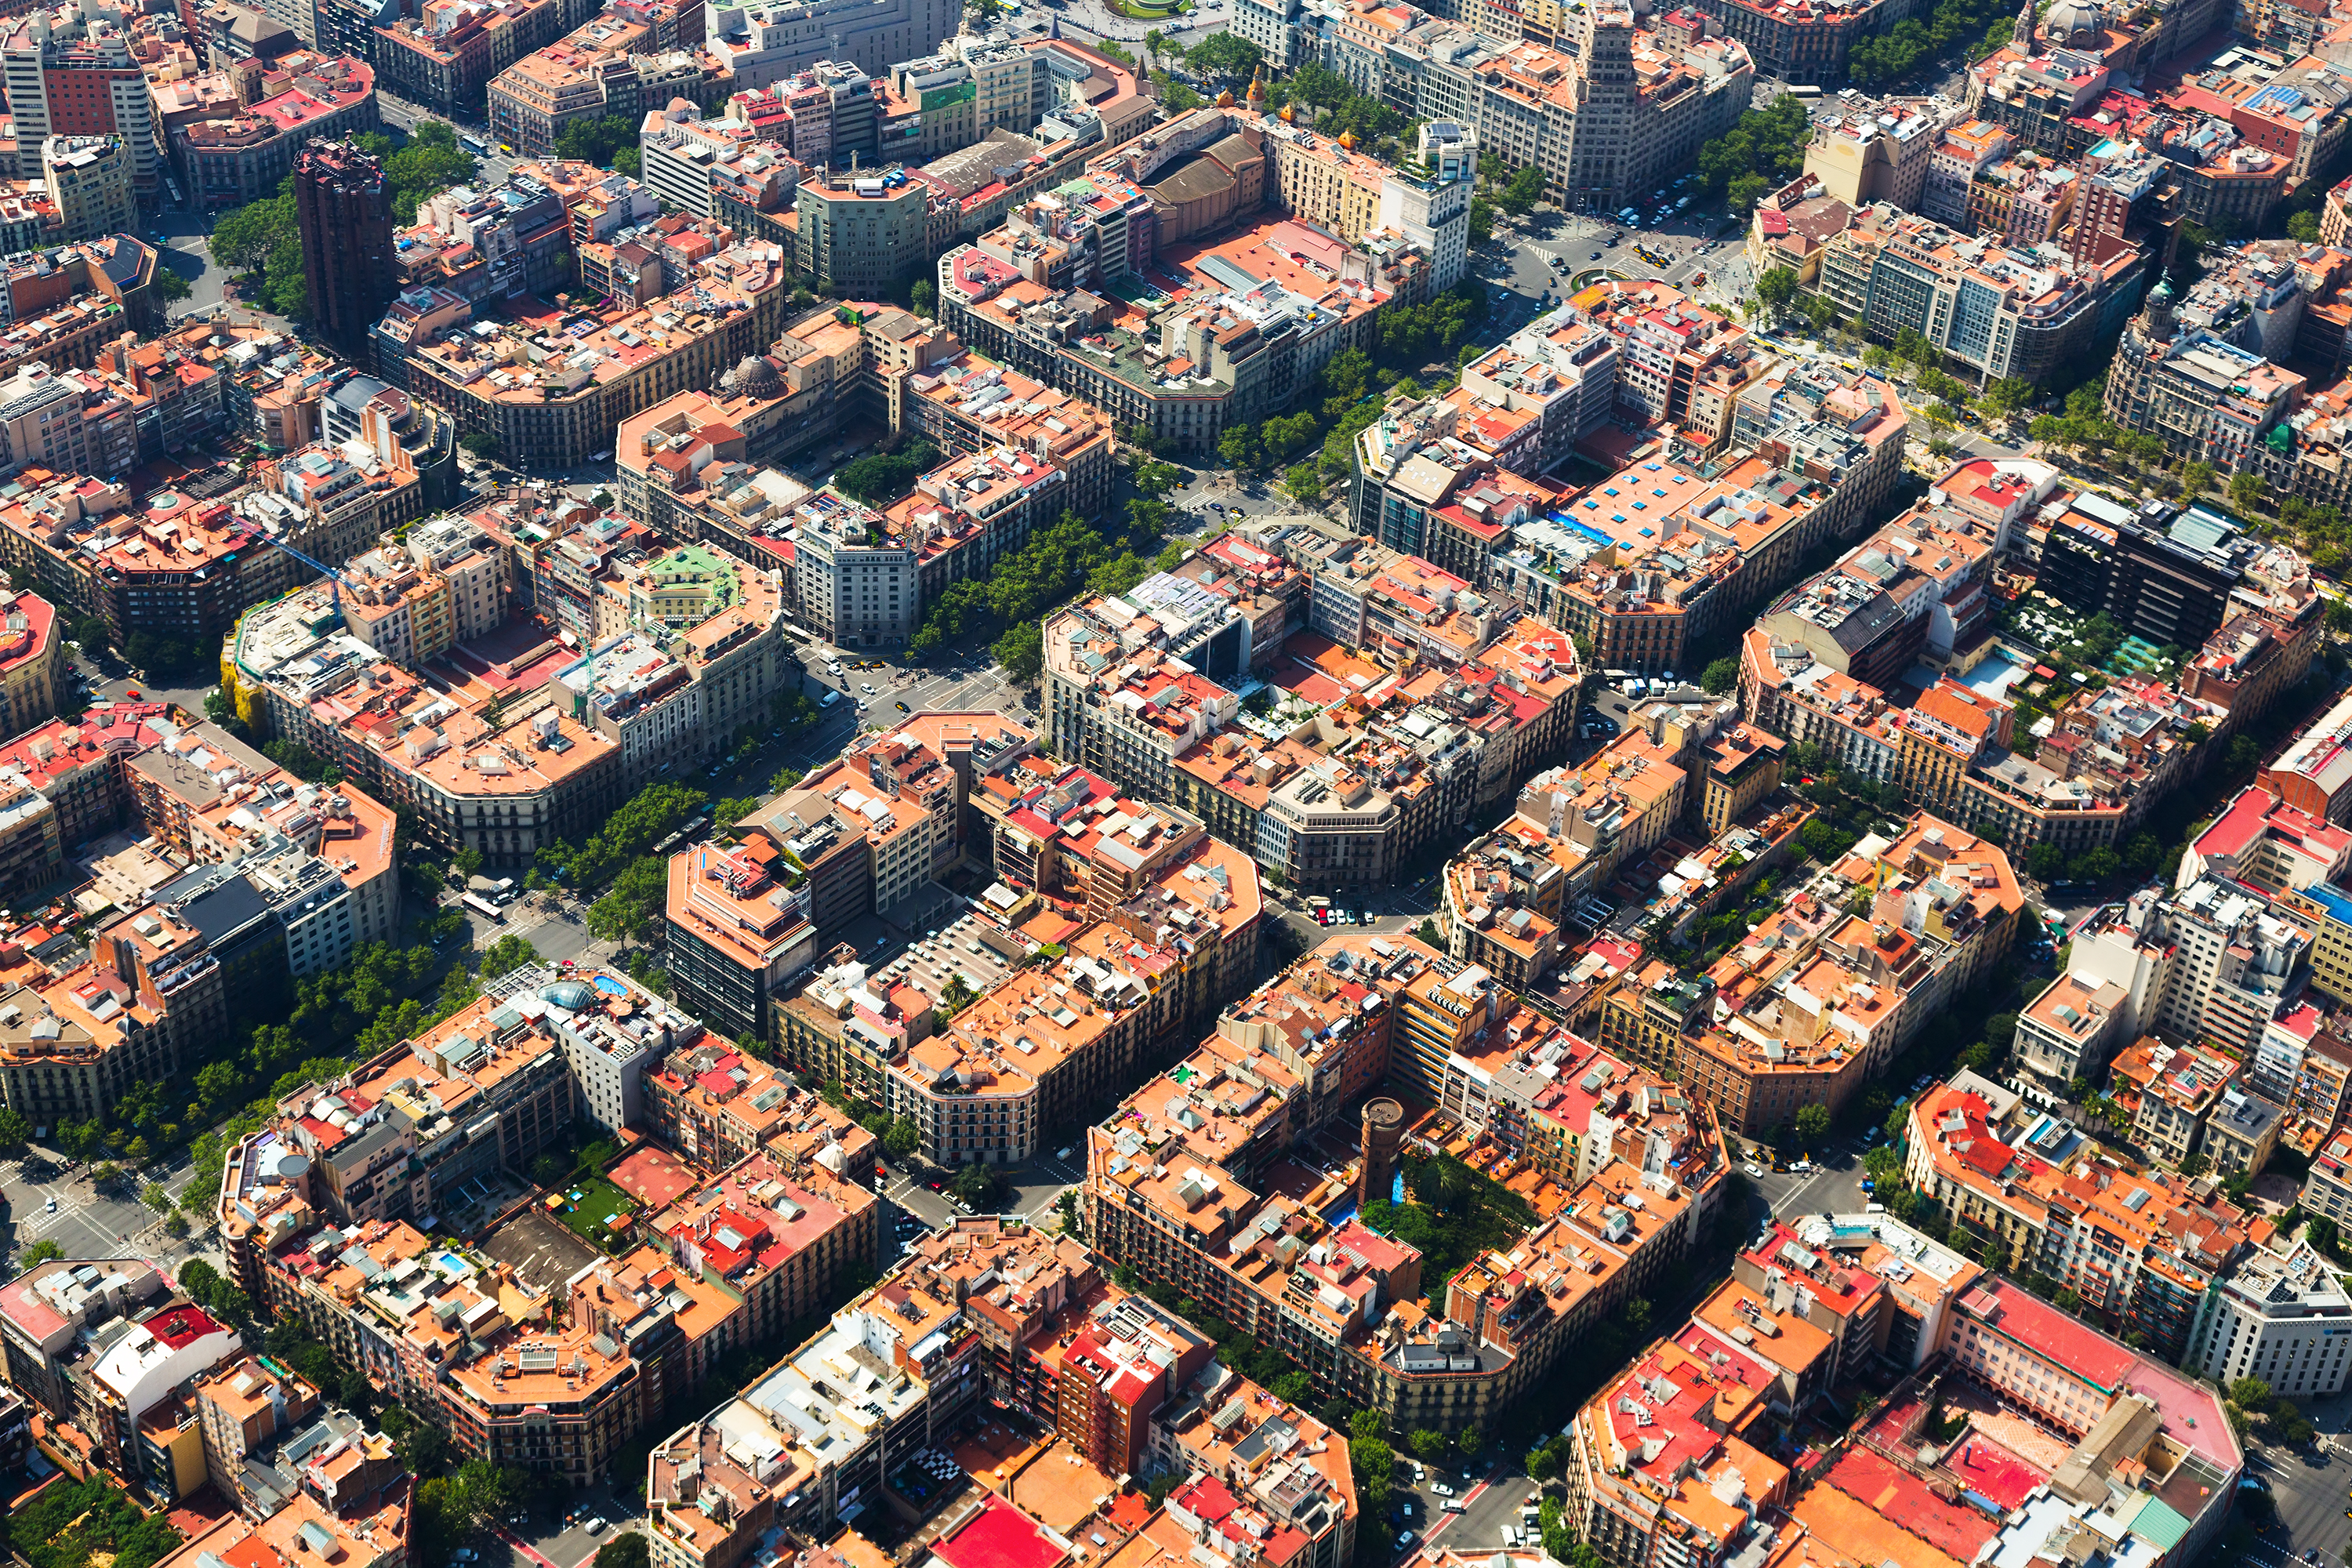 Aerial view of residence districts in european city. Eixample district. Barcelona, Spain